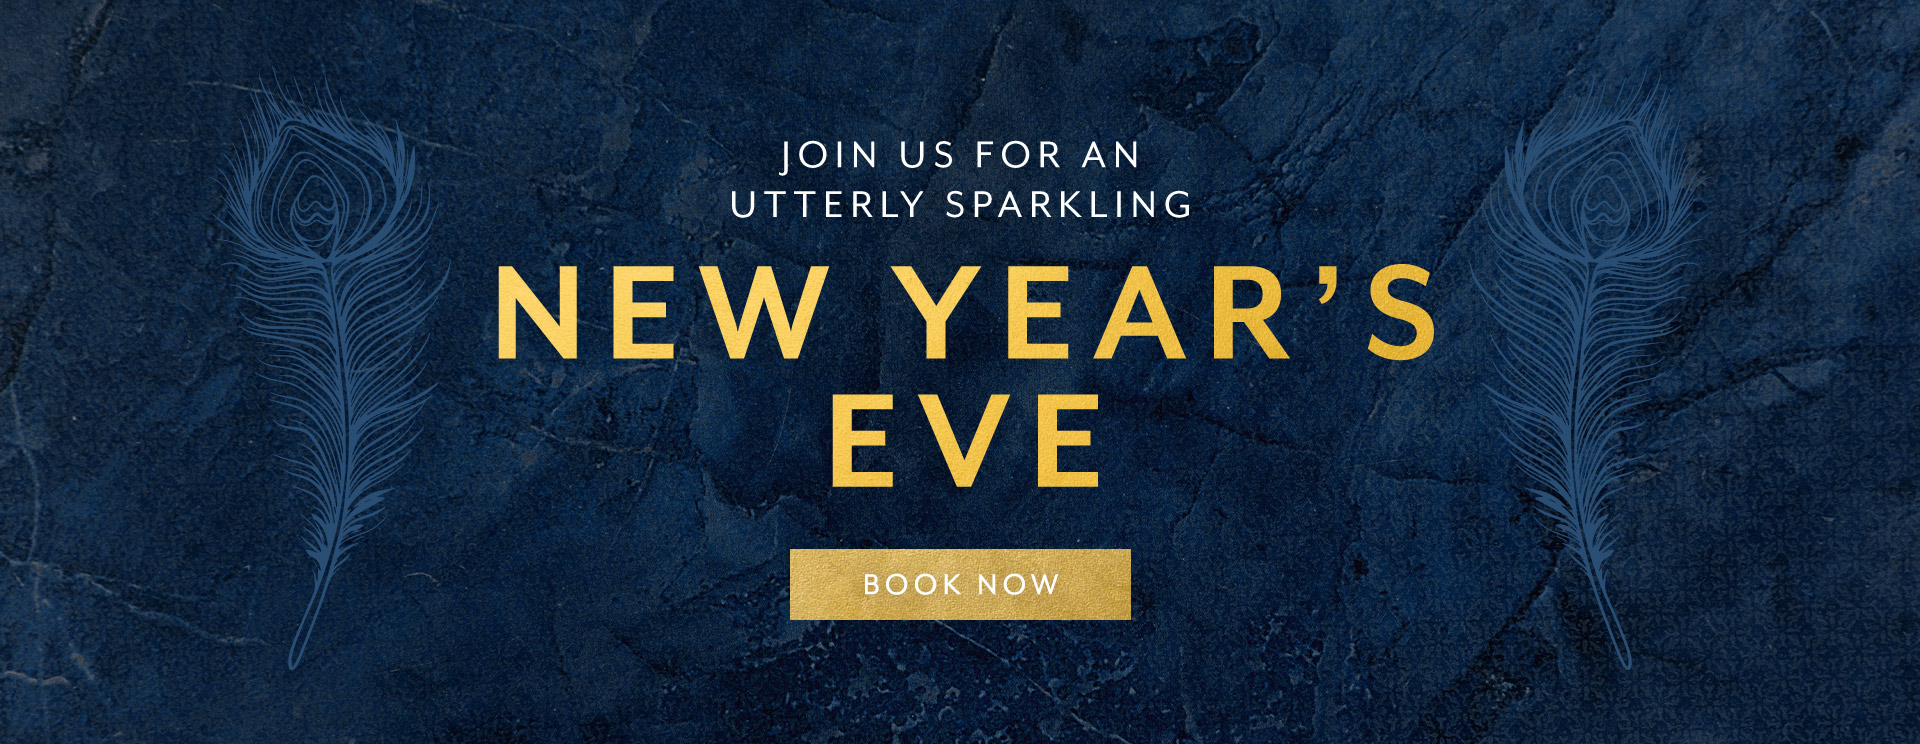 New Year's Eve at The Swan